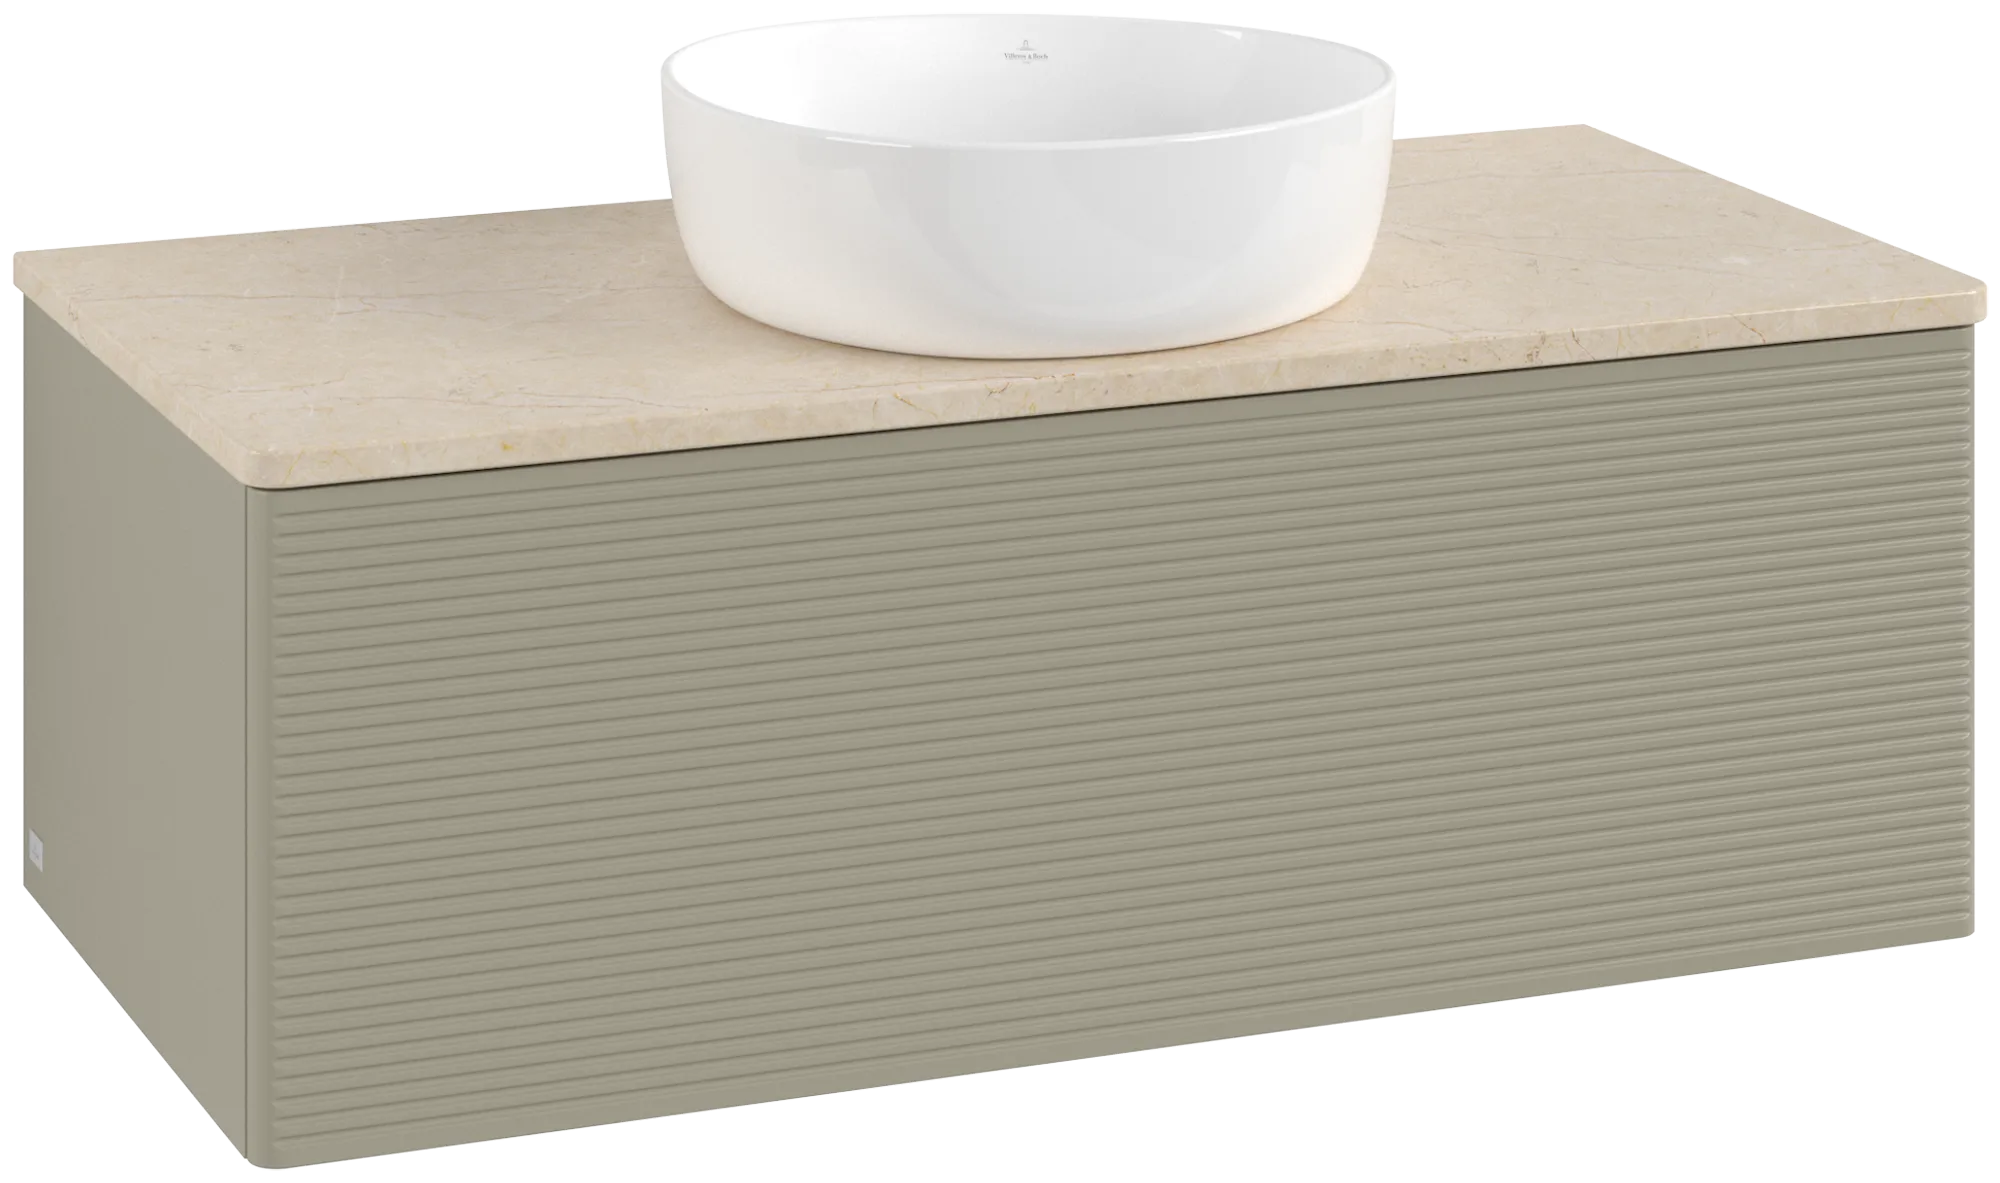 Picture of VILLEROY BOCH Antao Vanity unit, with lighting, 1 pull-out compartment, 1000 x 360 x 500 mm, Front with grain texture, Stone Grey Matt Lacquer / Botticino #L31113HK